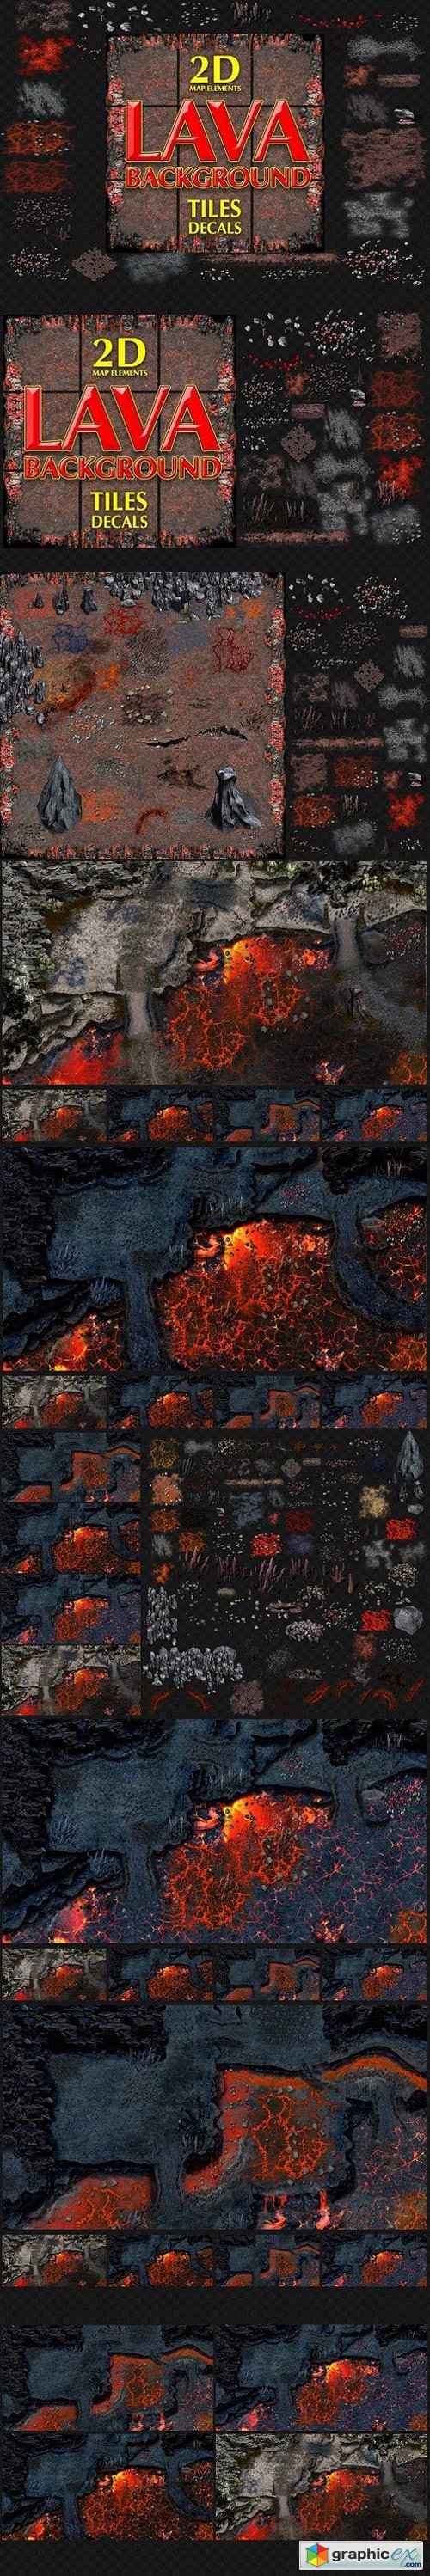 LAVA GAME BACKGROUND TILES AND DECAL